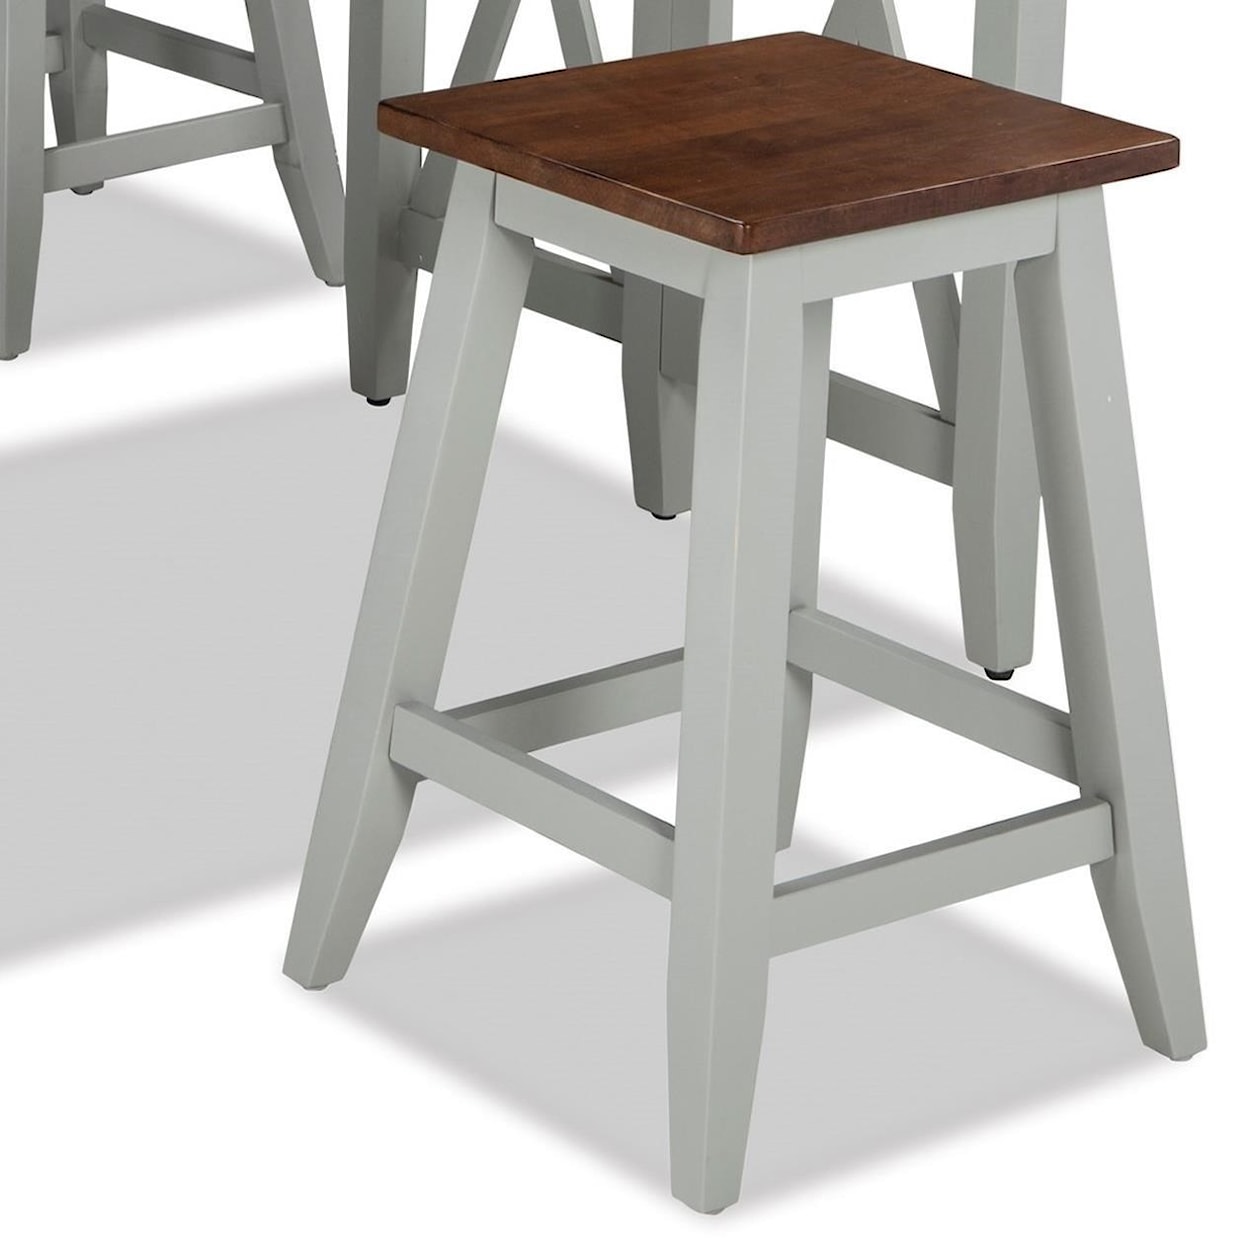 Intercon Small Space 24" Backless Barstool